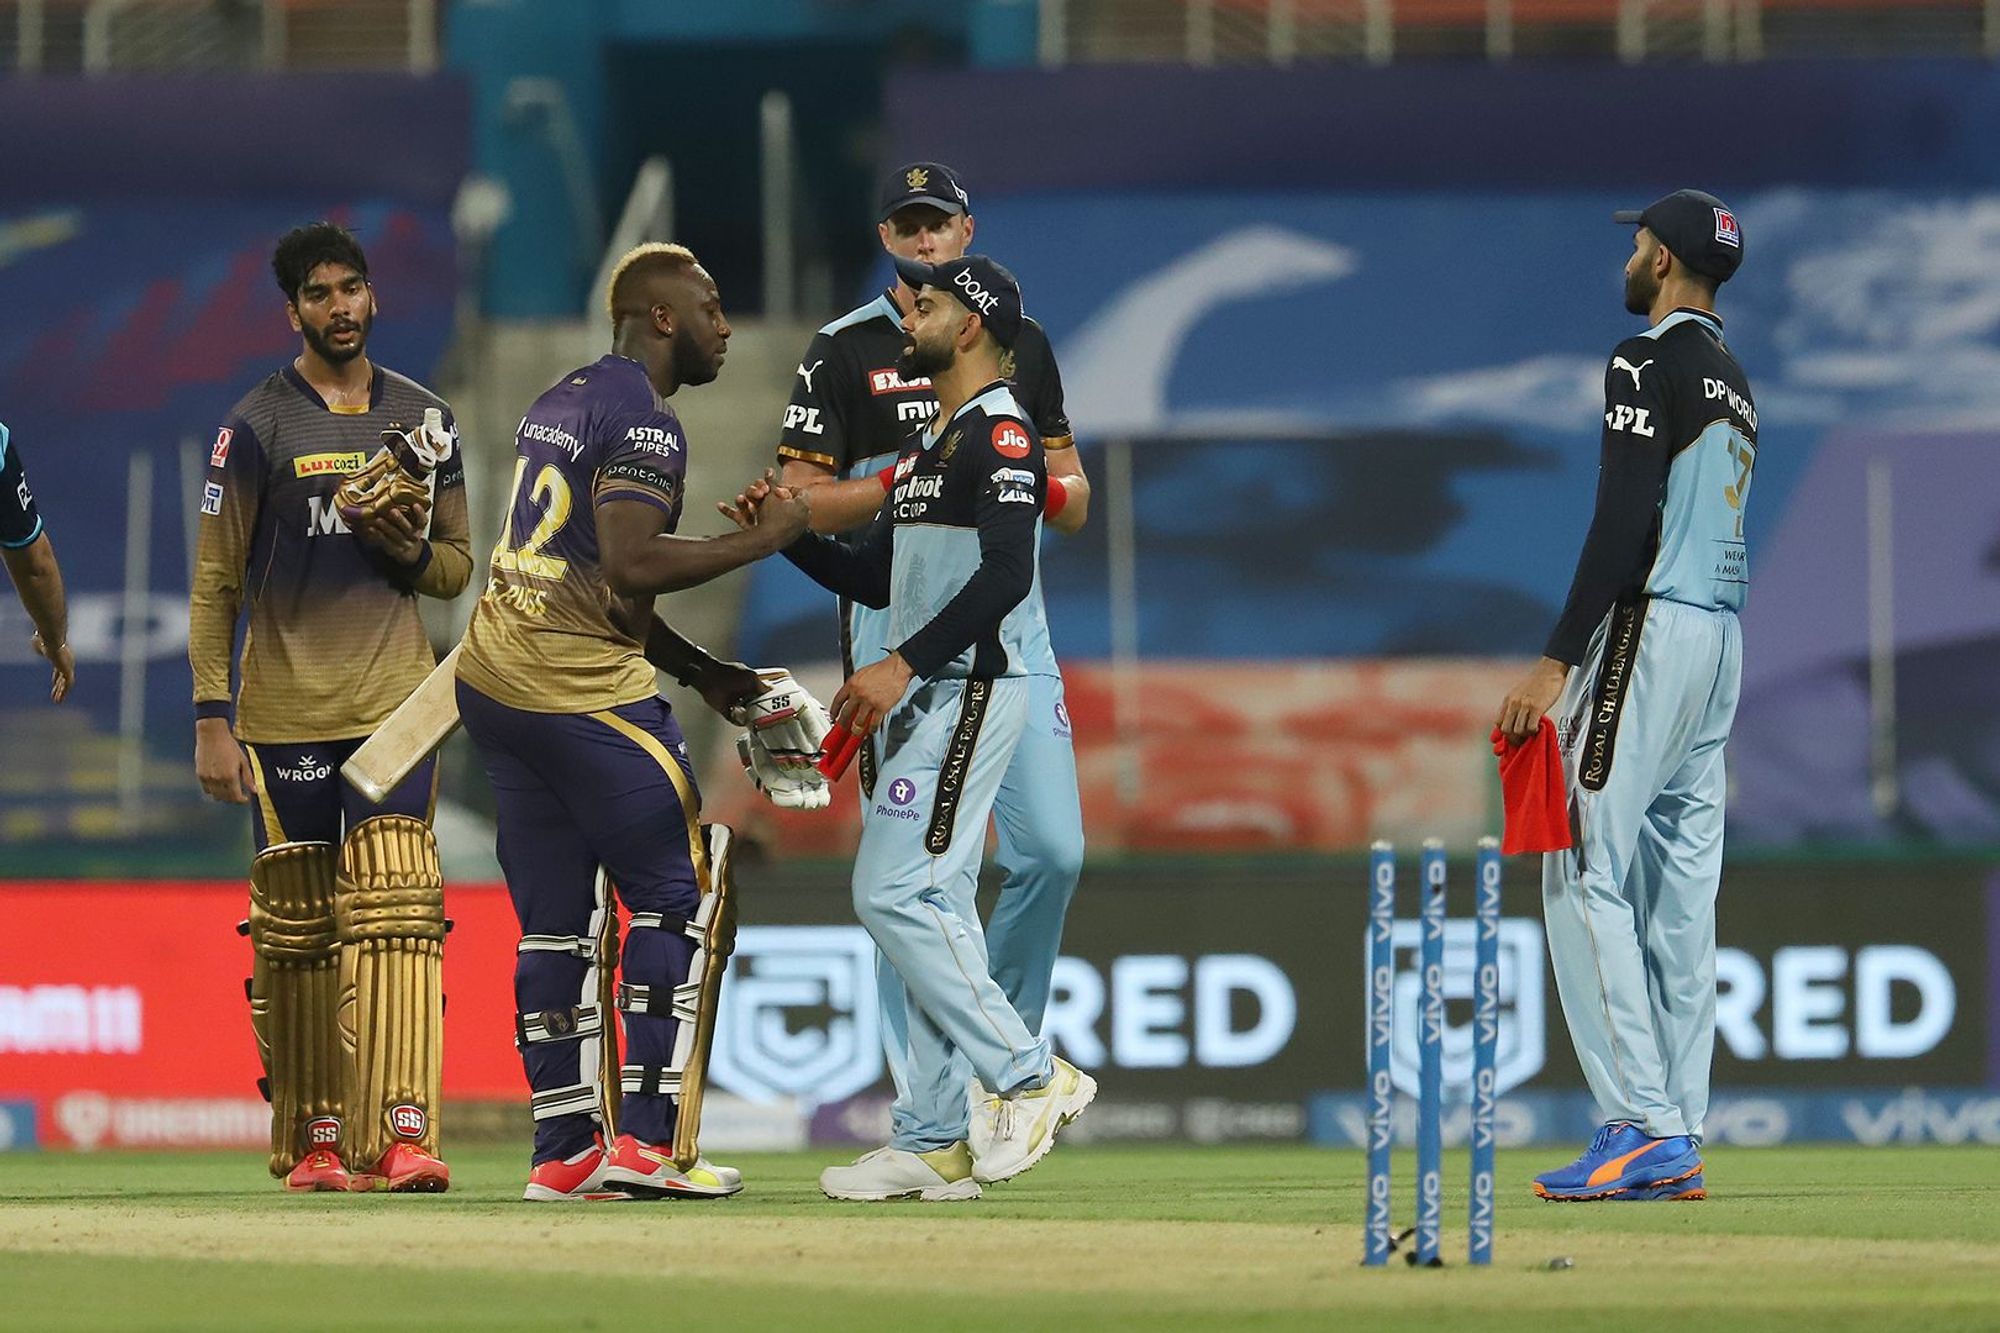 RCB hopes to turn around pretty quickly after massive defeat against KKR | BCCI/IPL